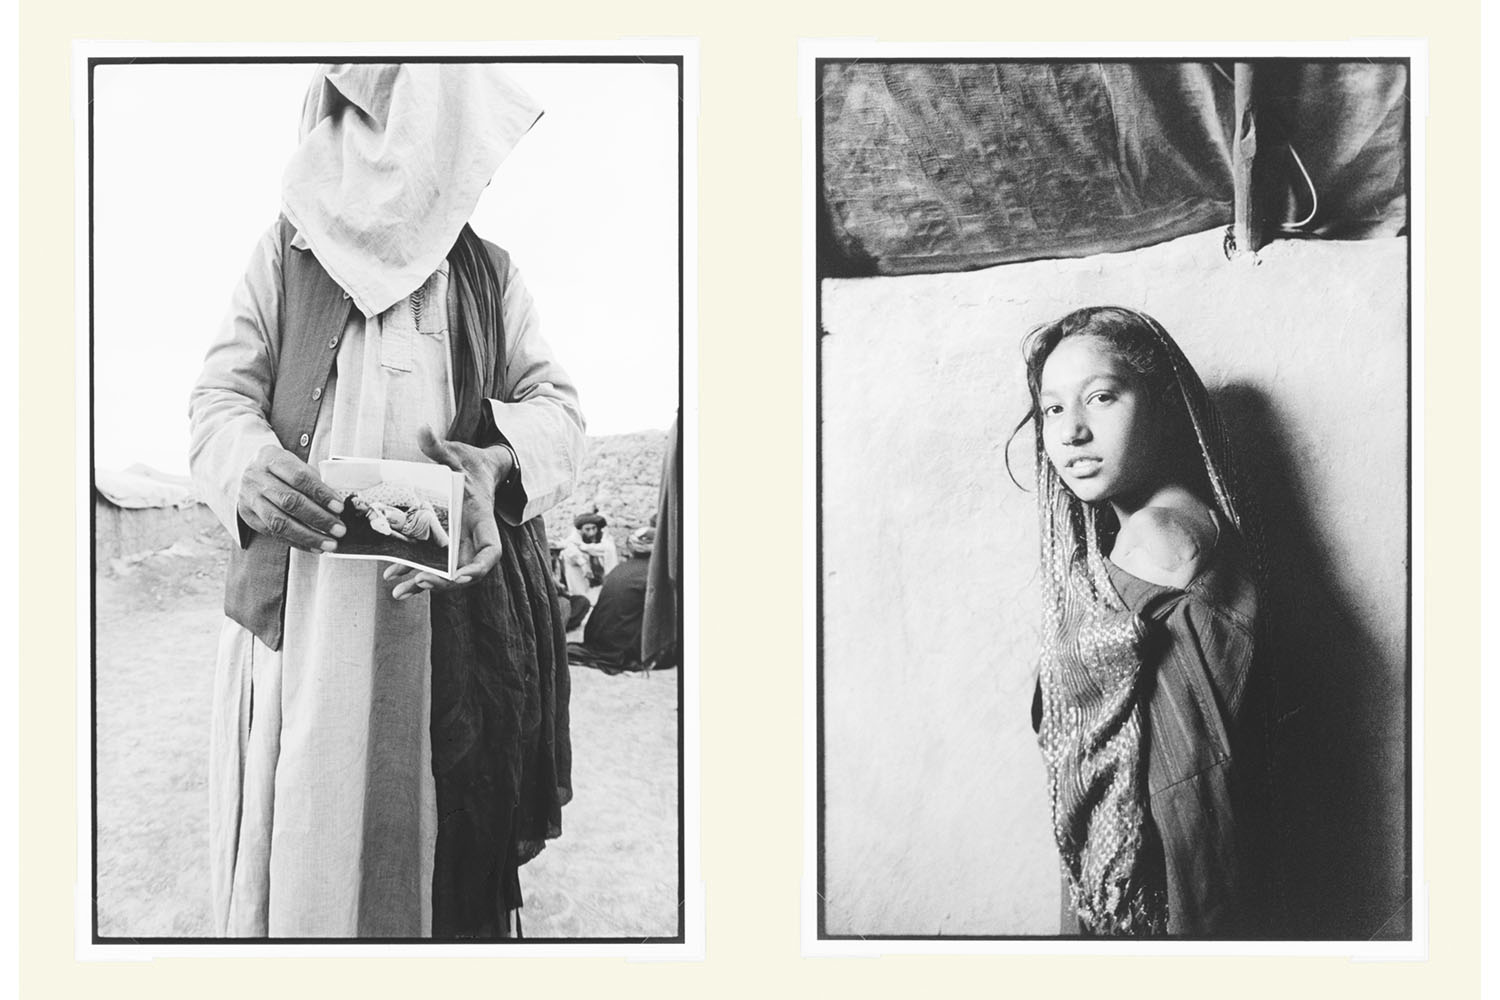 From Larry Towell's Afghanistan, published by Aperture